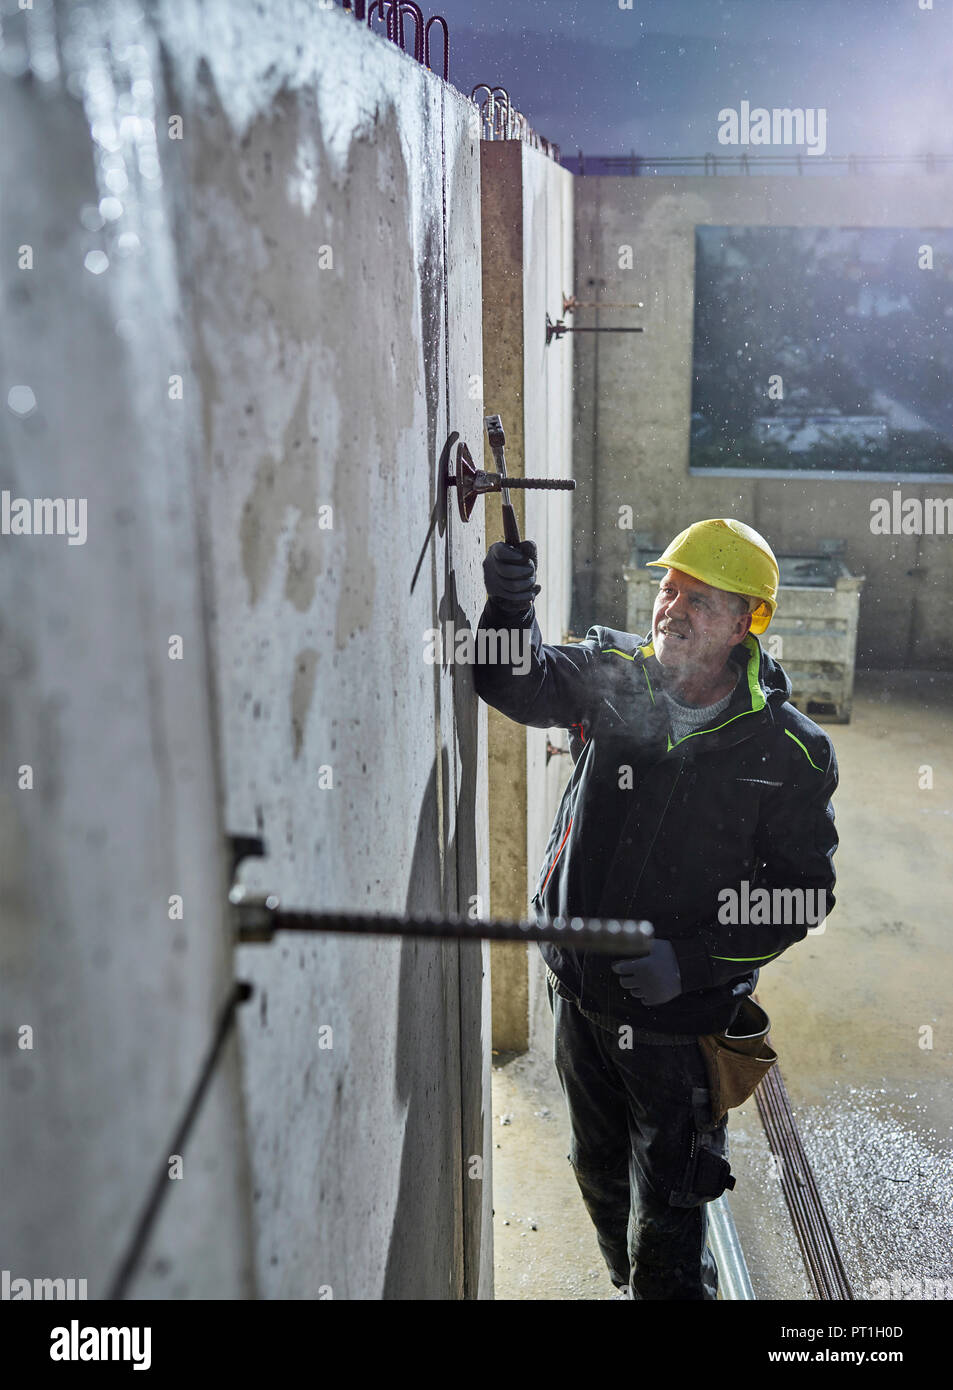 Construction worker fitting with hammer the iron rod Stock Photo